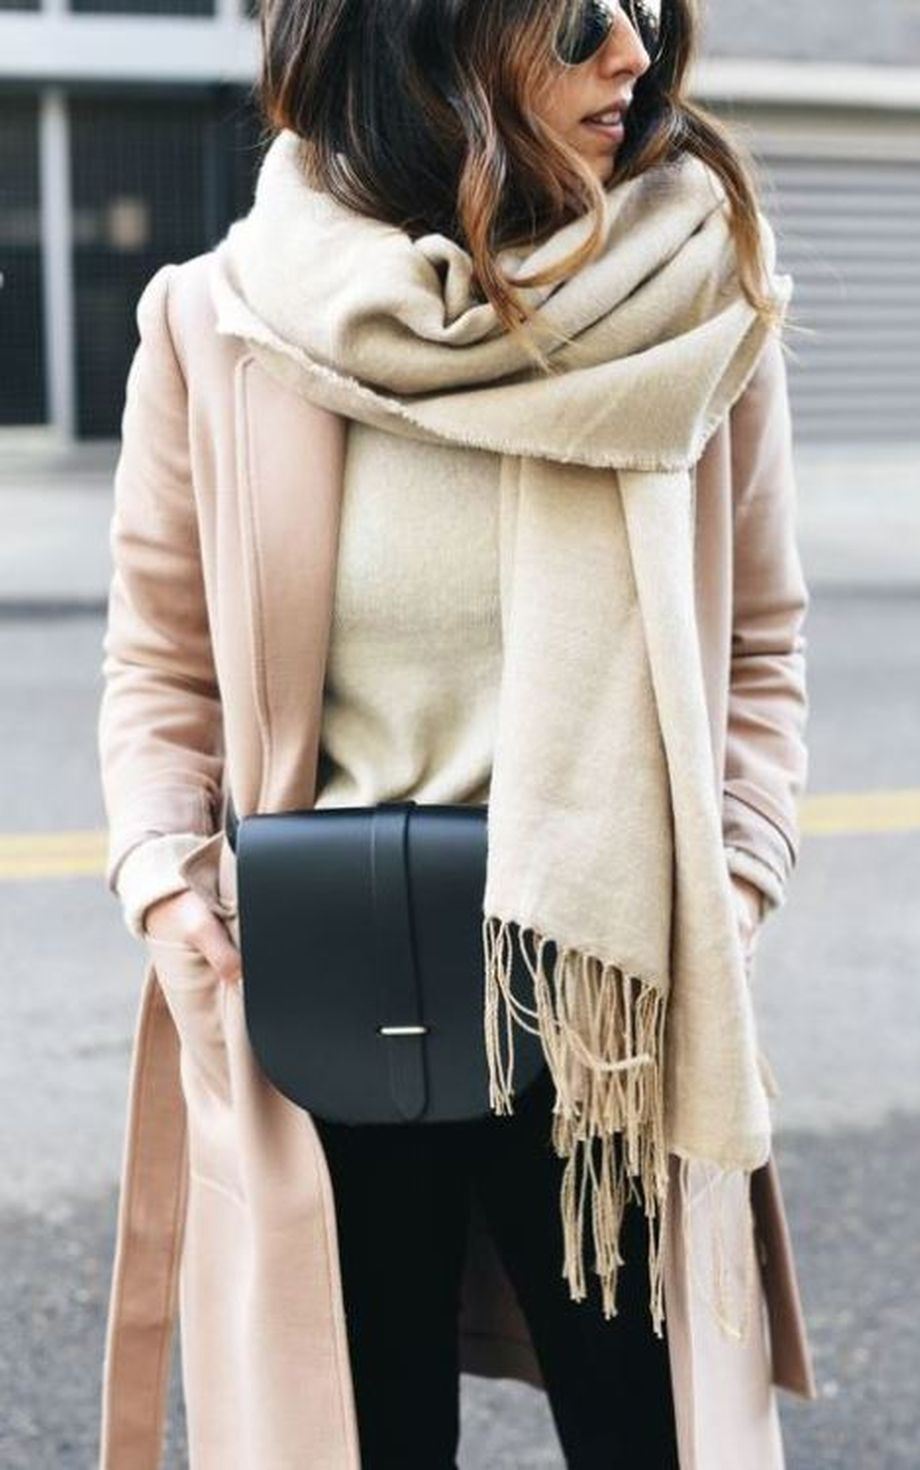 fashion trends | blush coat + cashmere scarf + bag + jeans + sweater